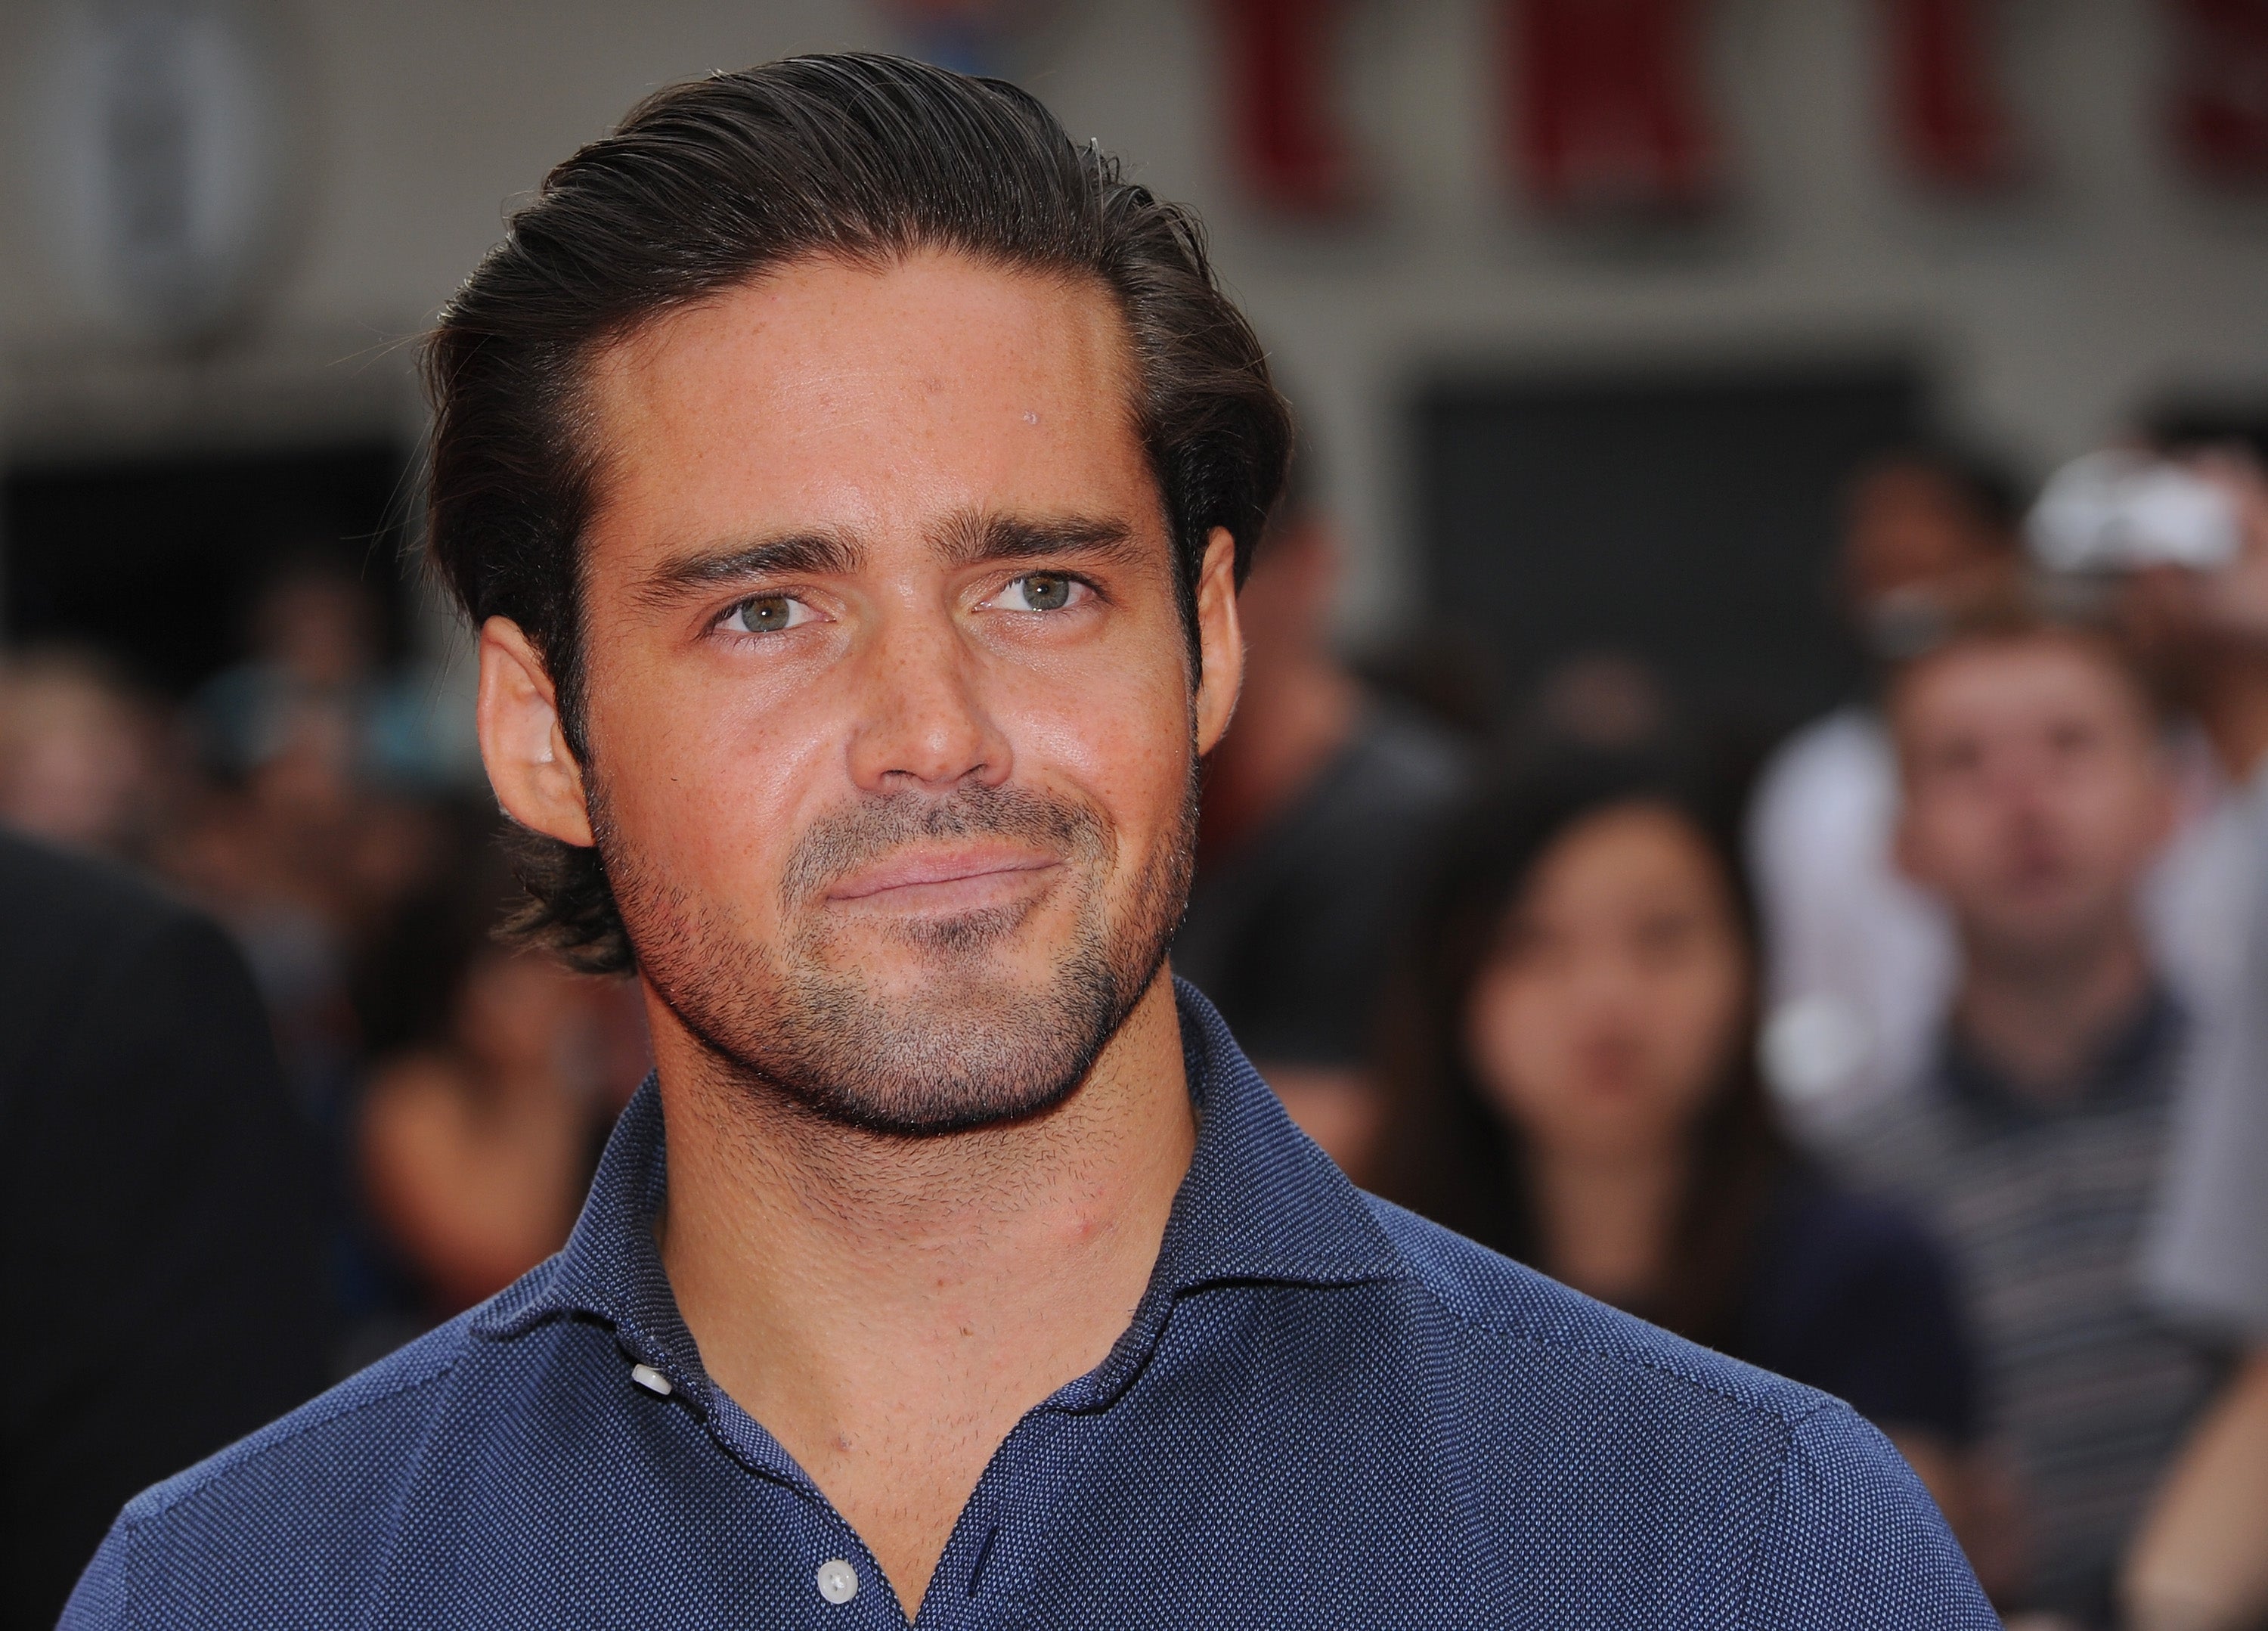 Made in Chelsea star Spencer Matthews says trying to recover his brother’s body was the “most meaningful and humbling experience”